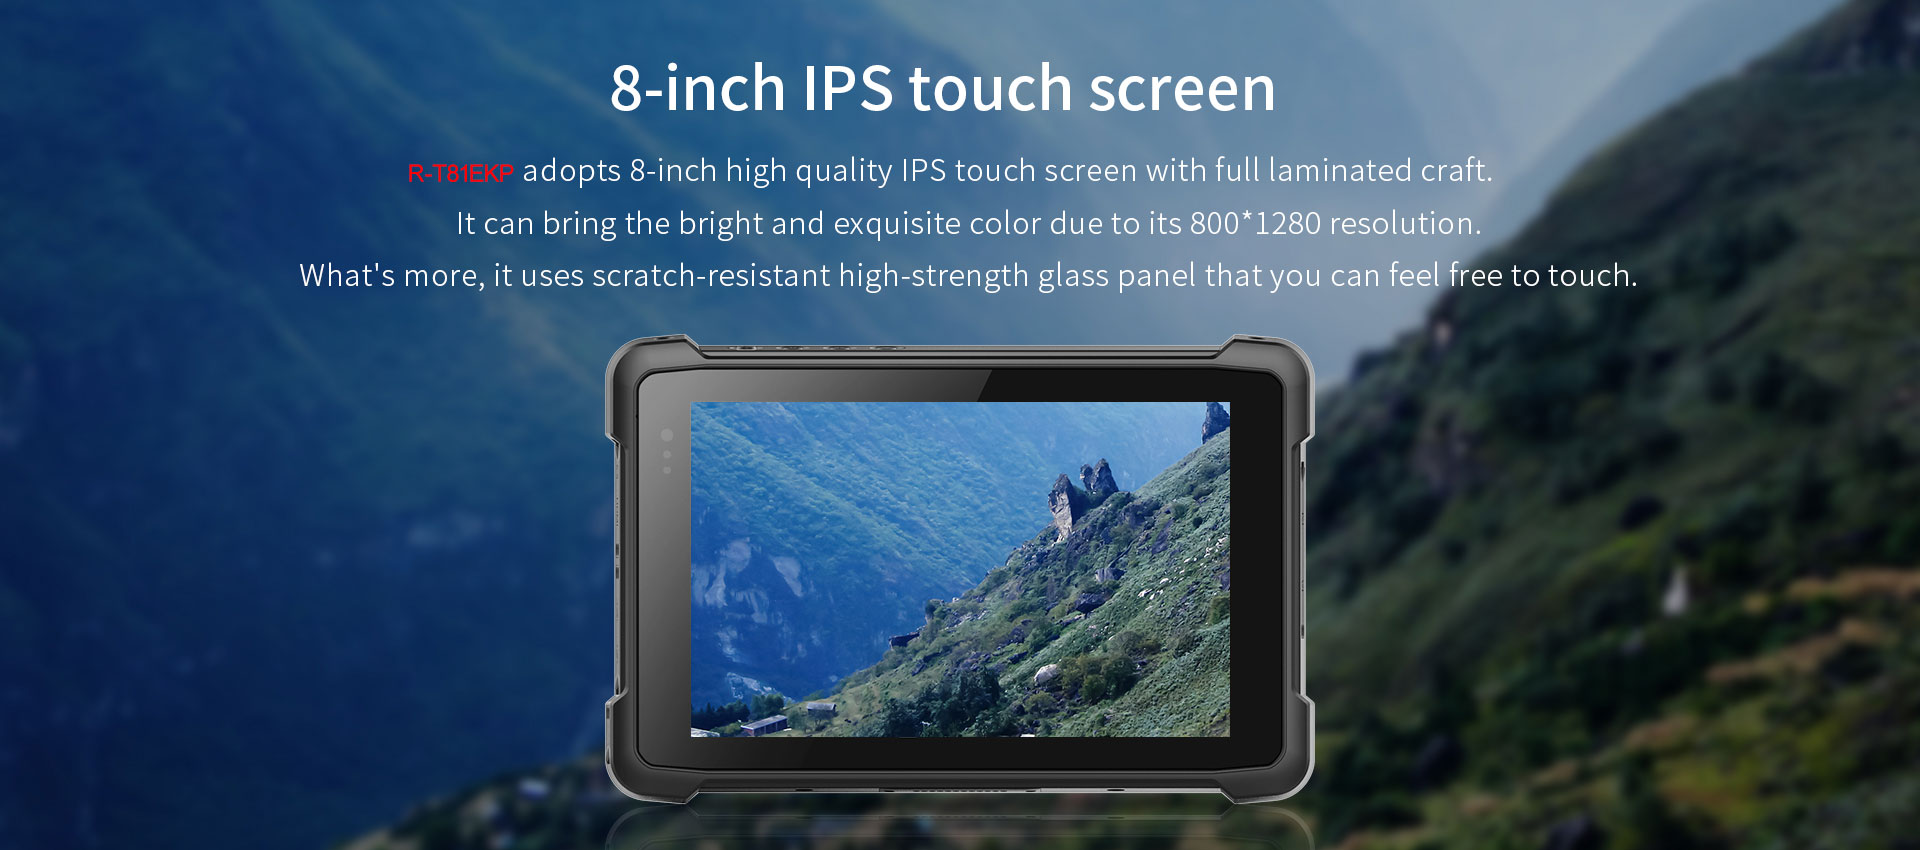 Android 11 Rugged Tablet 6000mAh 6GB 128GB, Integrated 3G/4G all network